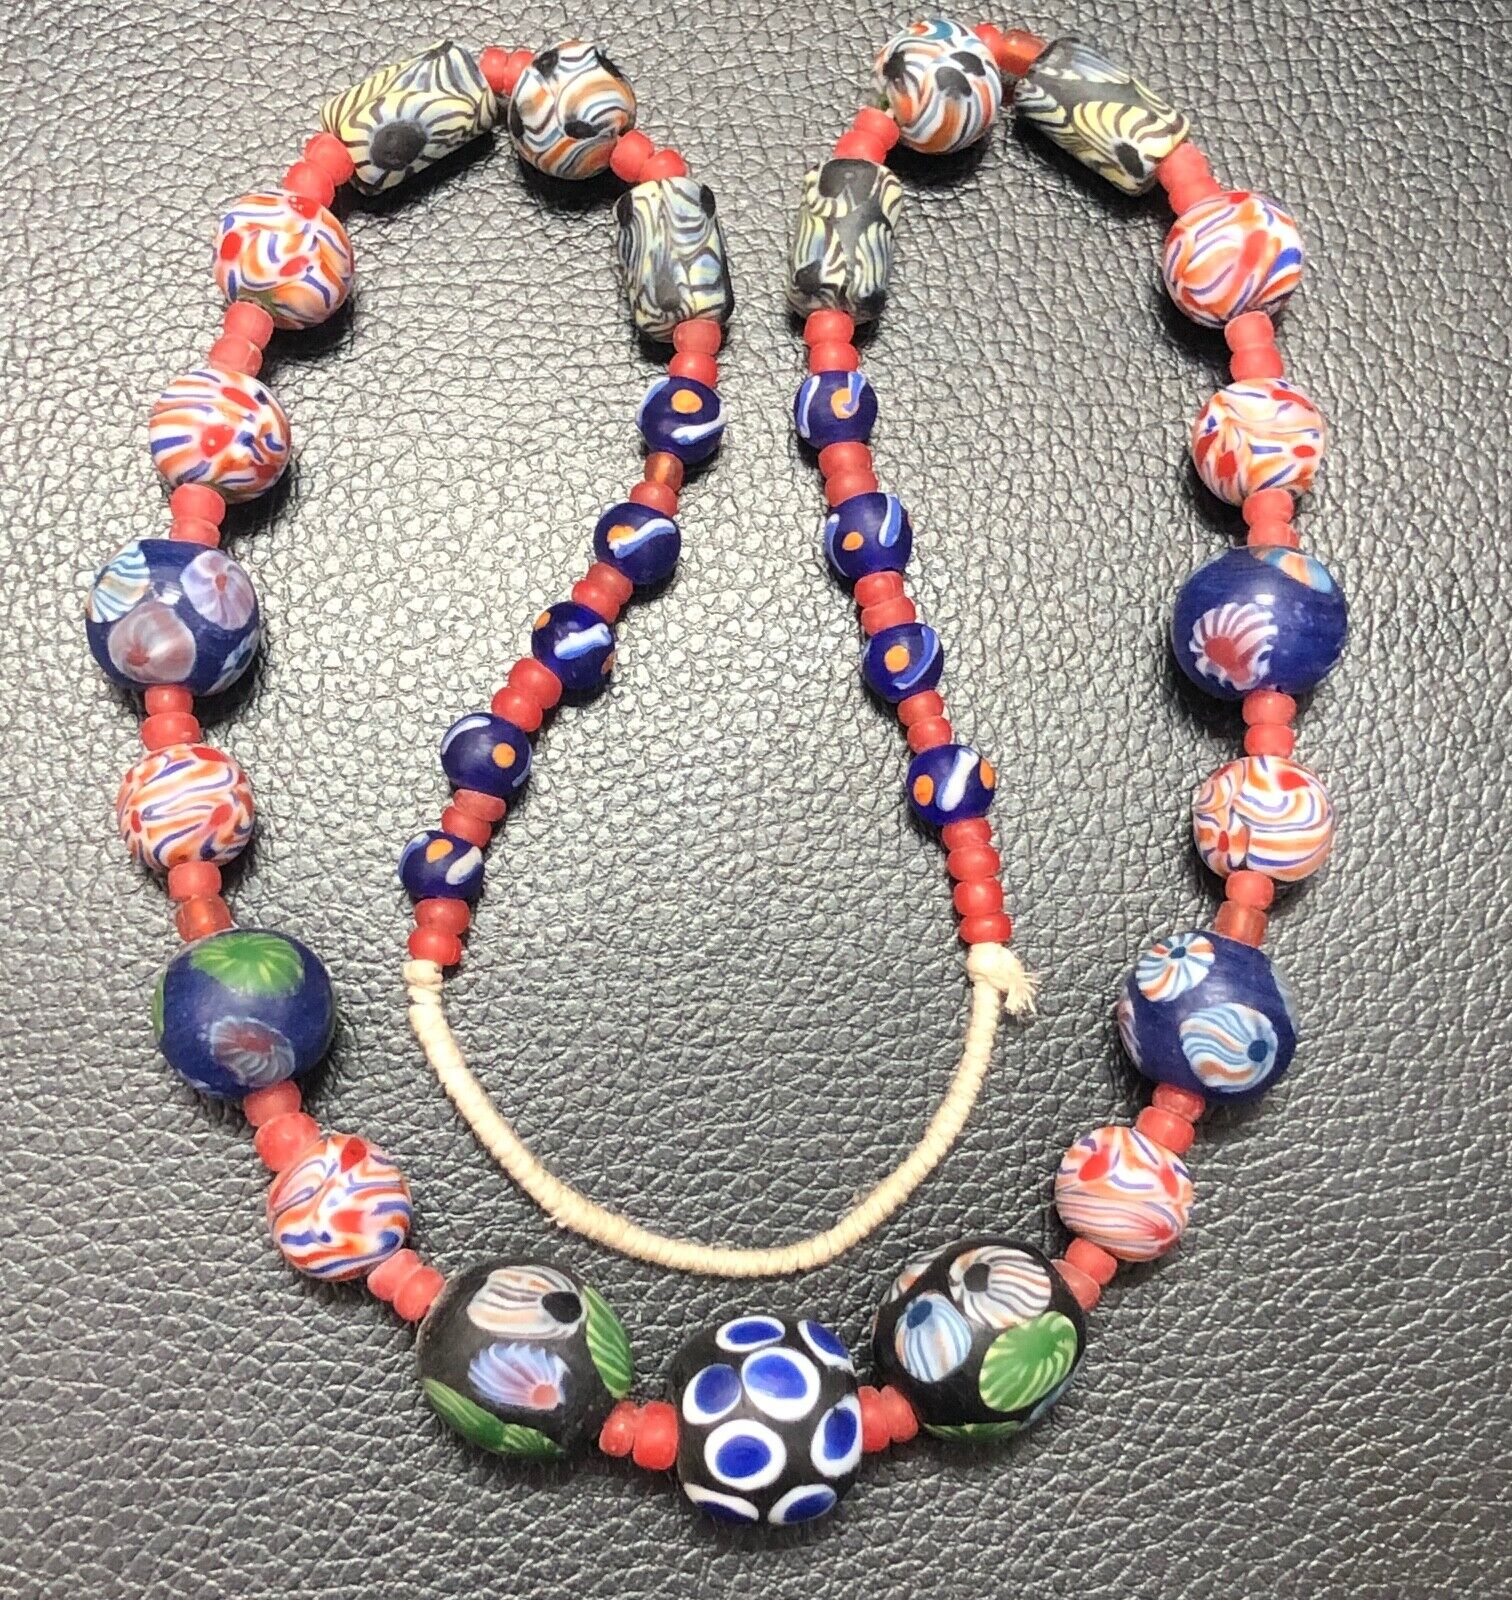 Authentic beautiful vintage african glass beads,genuine african glass beads.